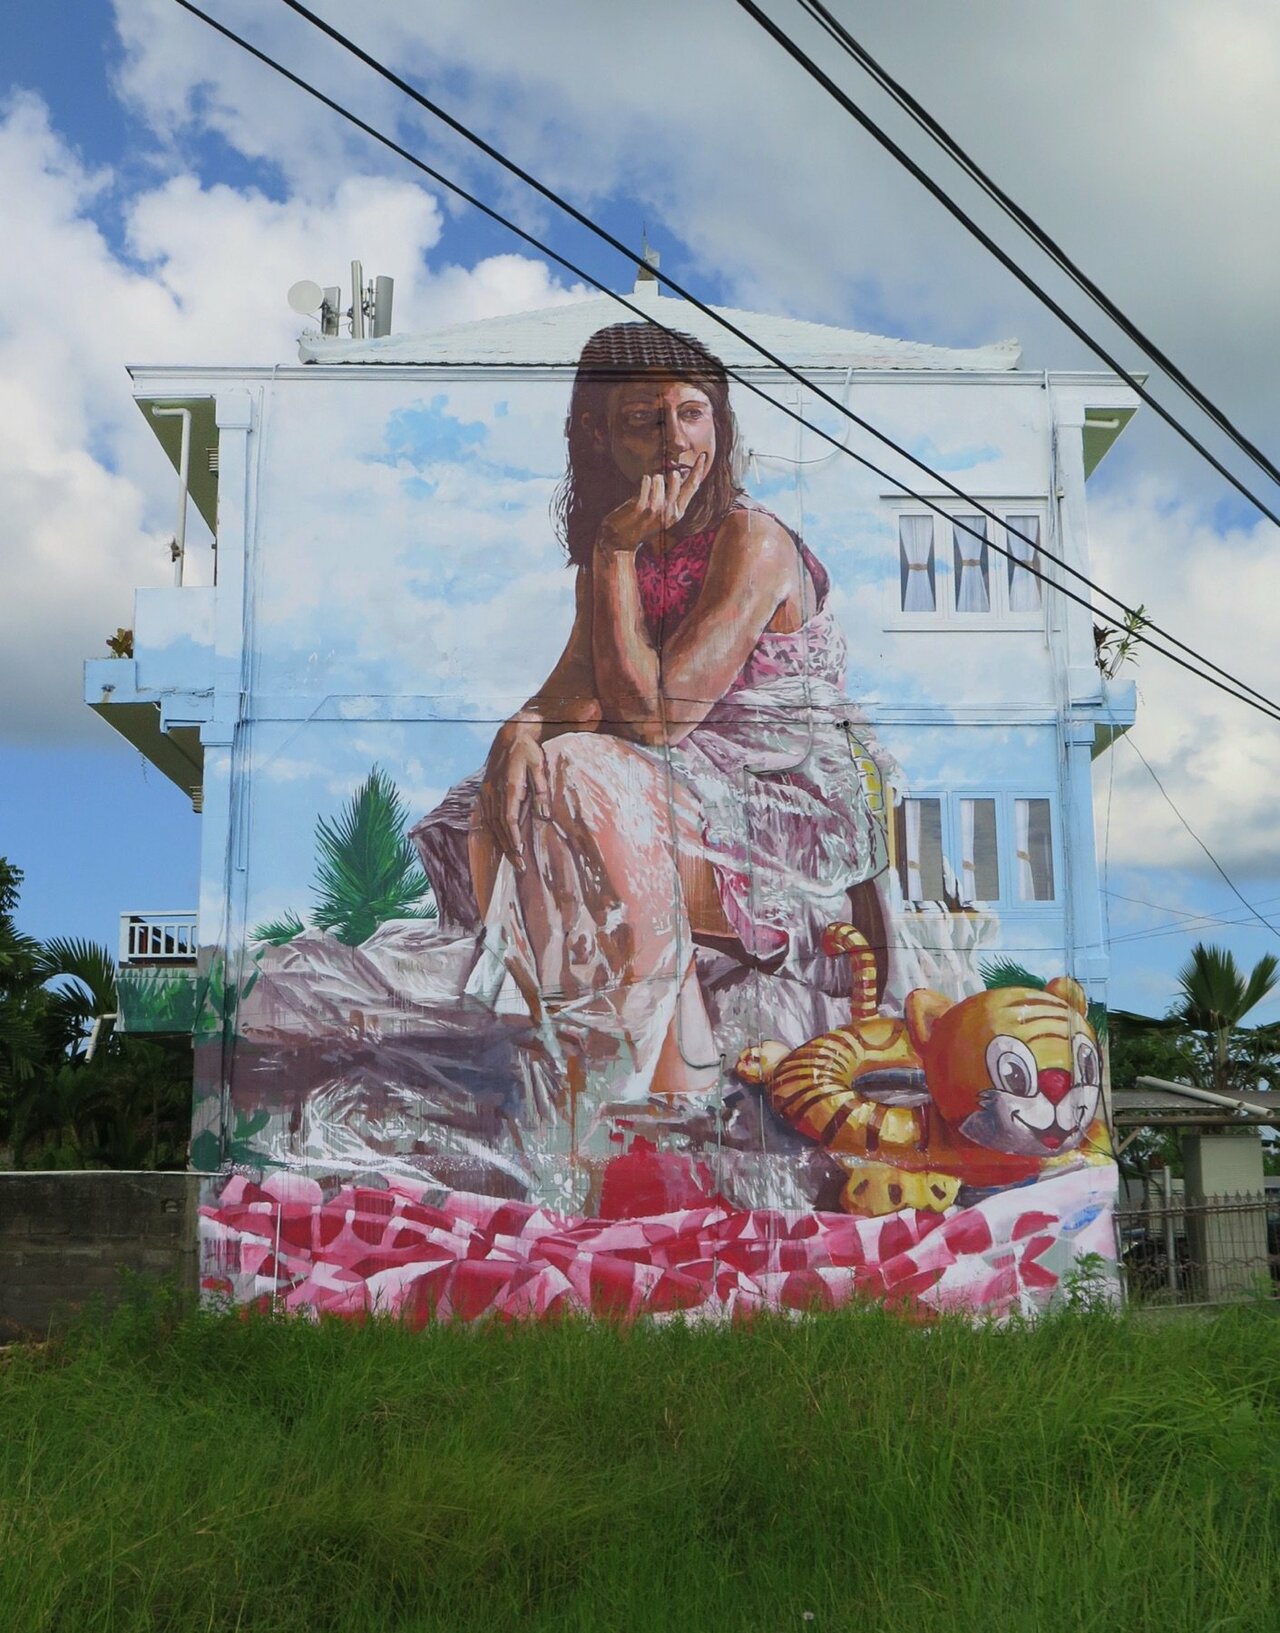 TropicaFestival: "Girl With Inflatable Tiger" by Fintan Magee in Bali #streetart https://streetartnews.net/2016/07/tropicafestival-girl-with-inflatable-tiger-by-fintan-magee-in-bali.html https://t.co/GYU110TZ5q